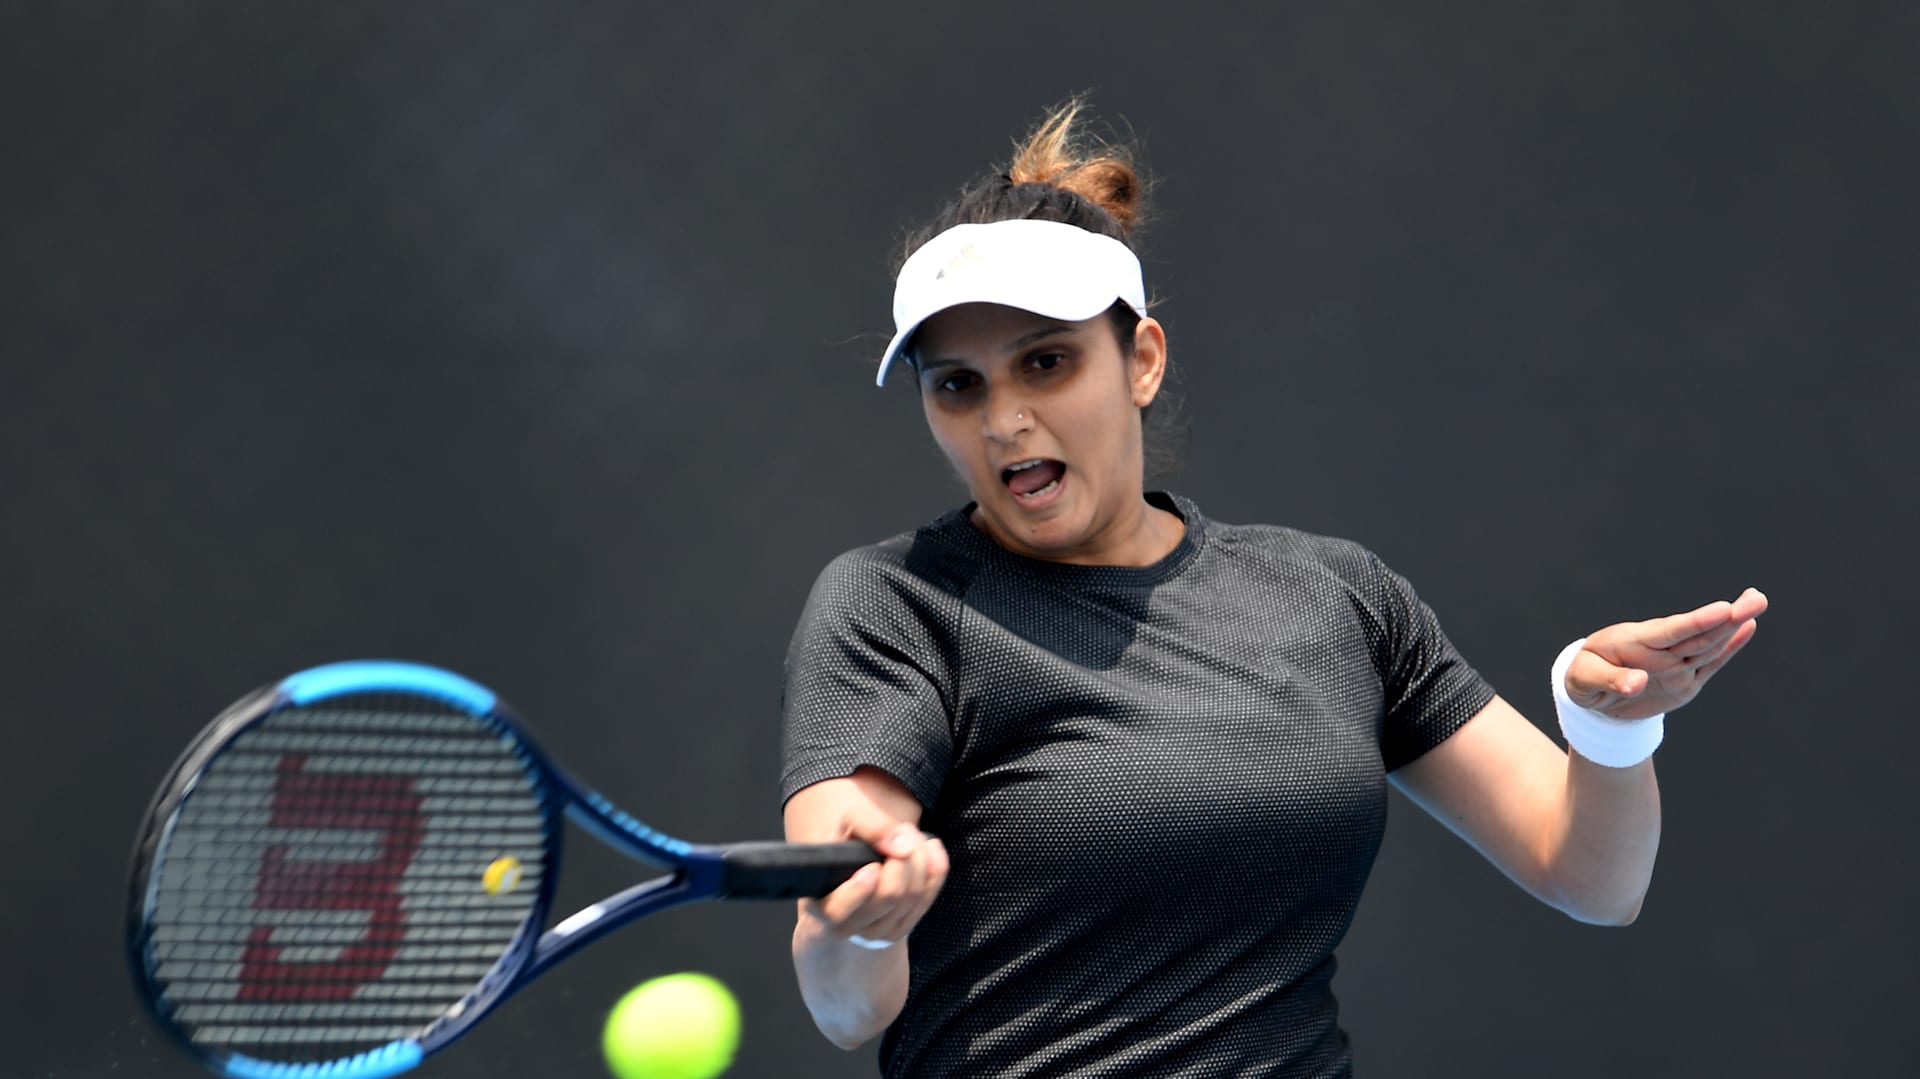 Sania Mirza opens up on her weight loss journey in Instagram post